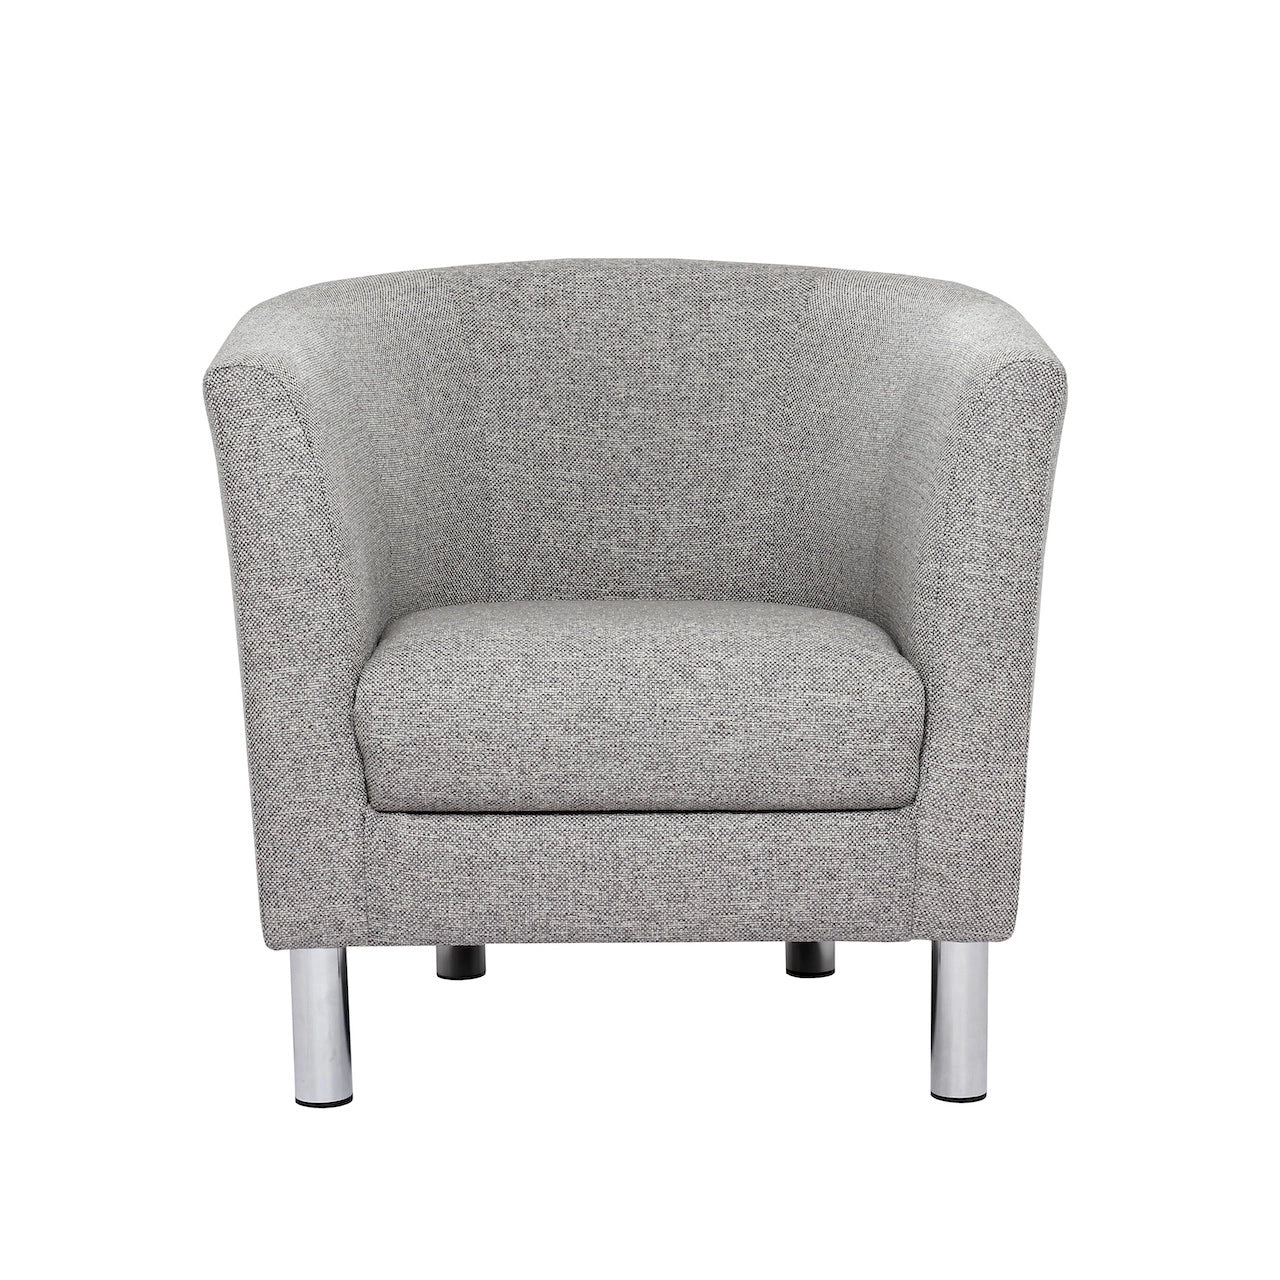 Furniture To Go Cleveland Armchair in Nova Light Grey